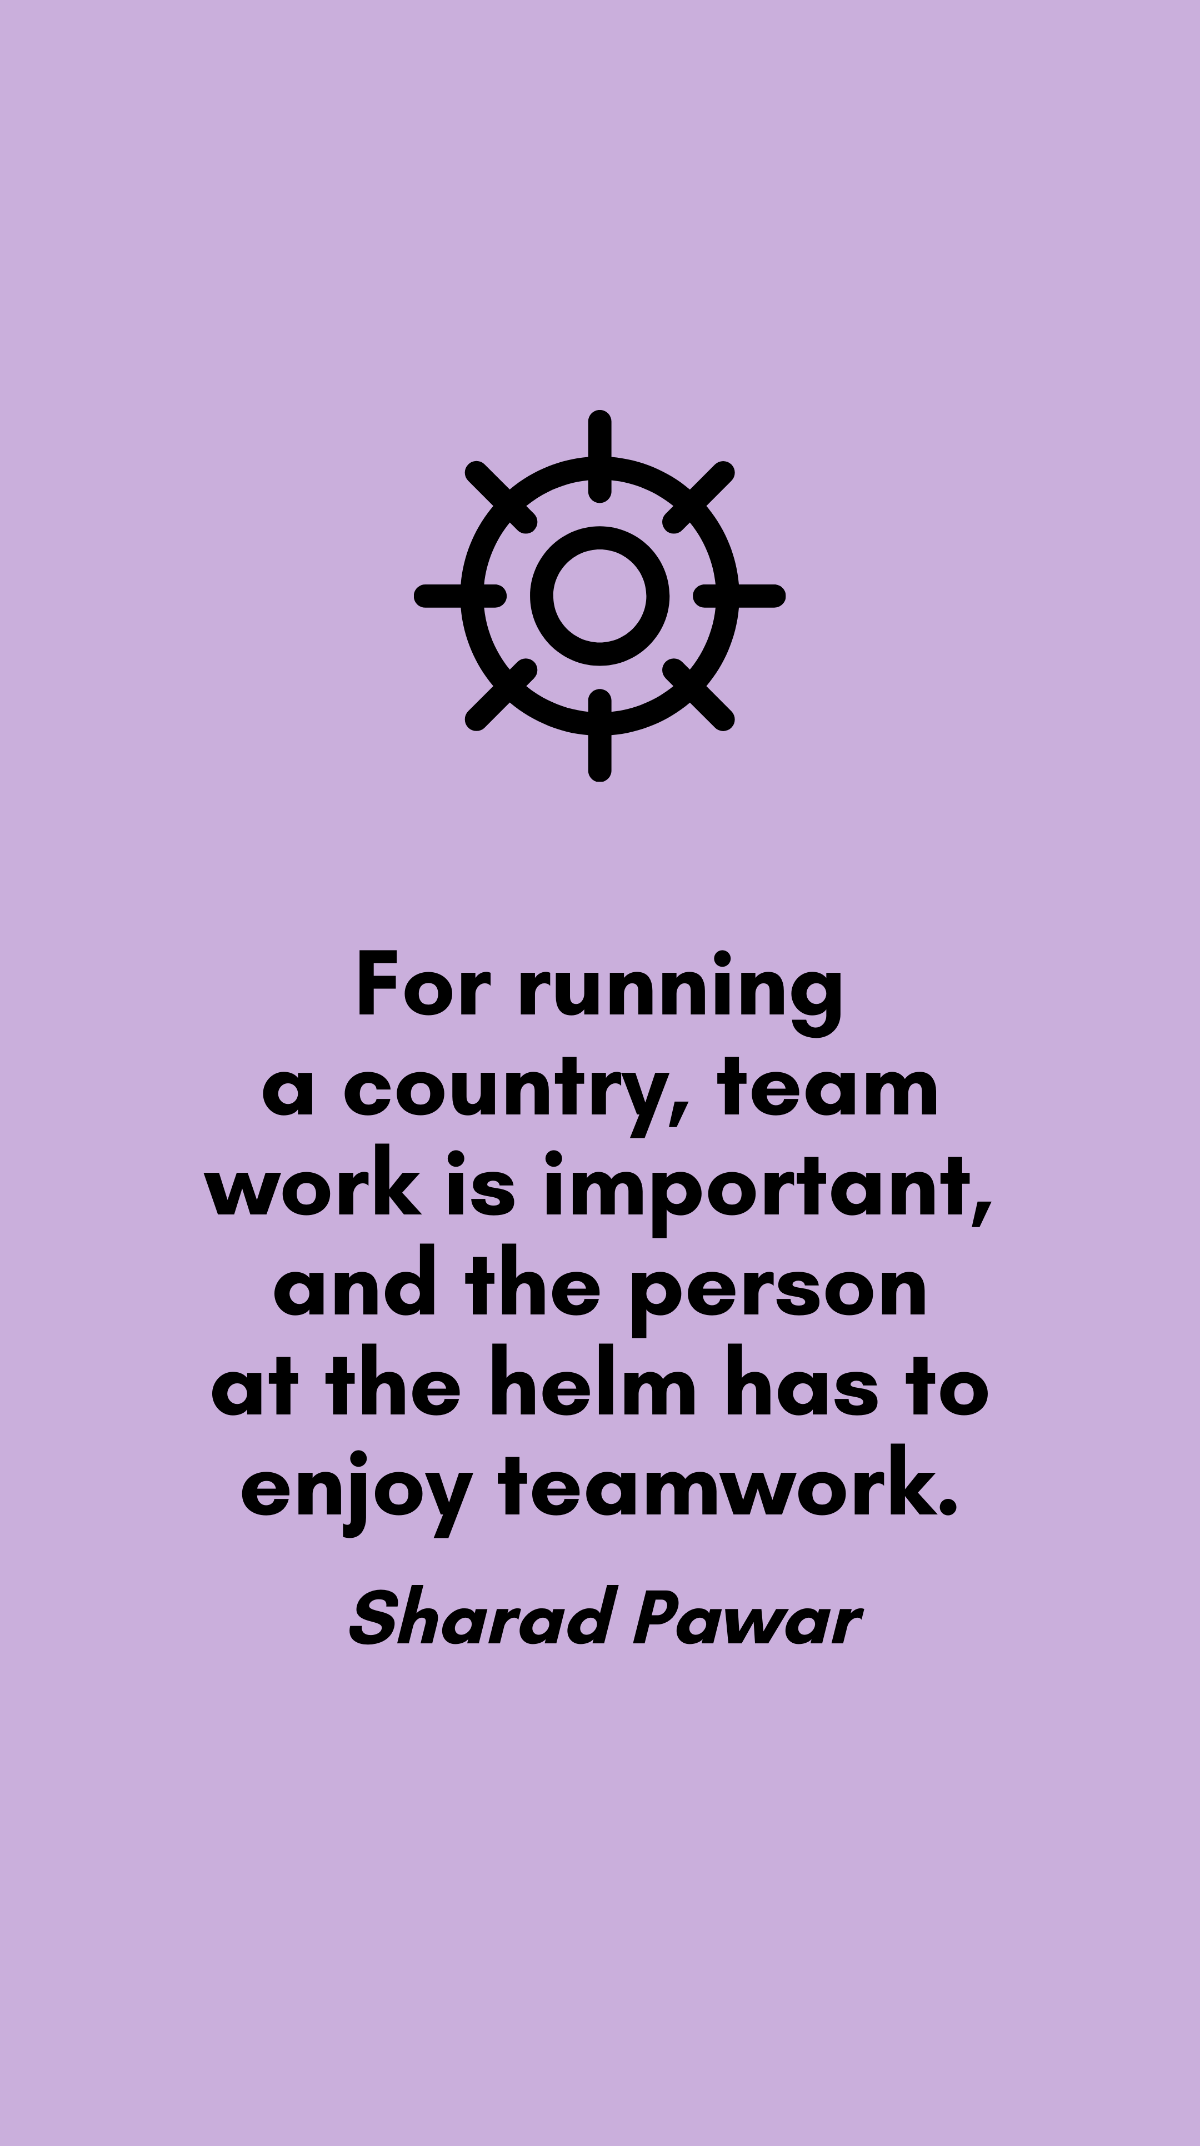 Sharad Pawar - For running a country, team work is important, and the person at the helm has to enjoy teamwork.